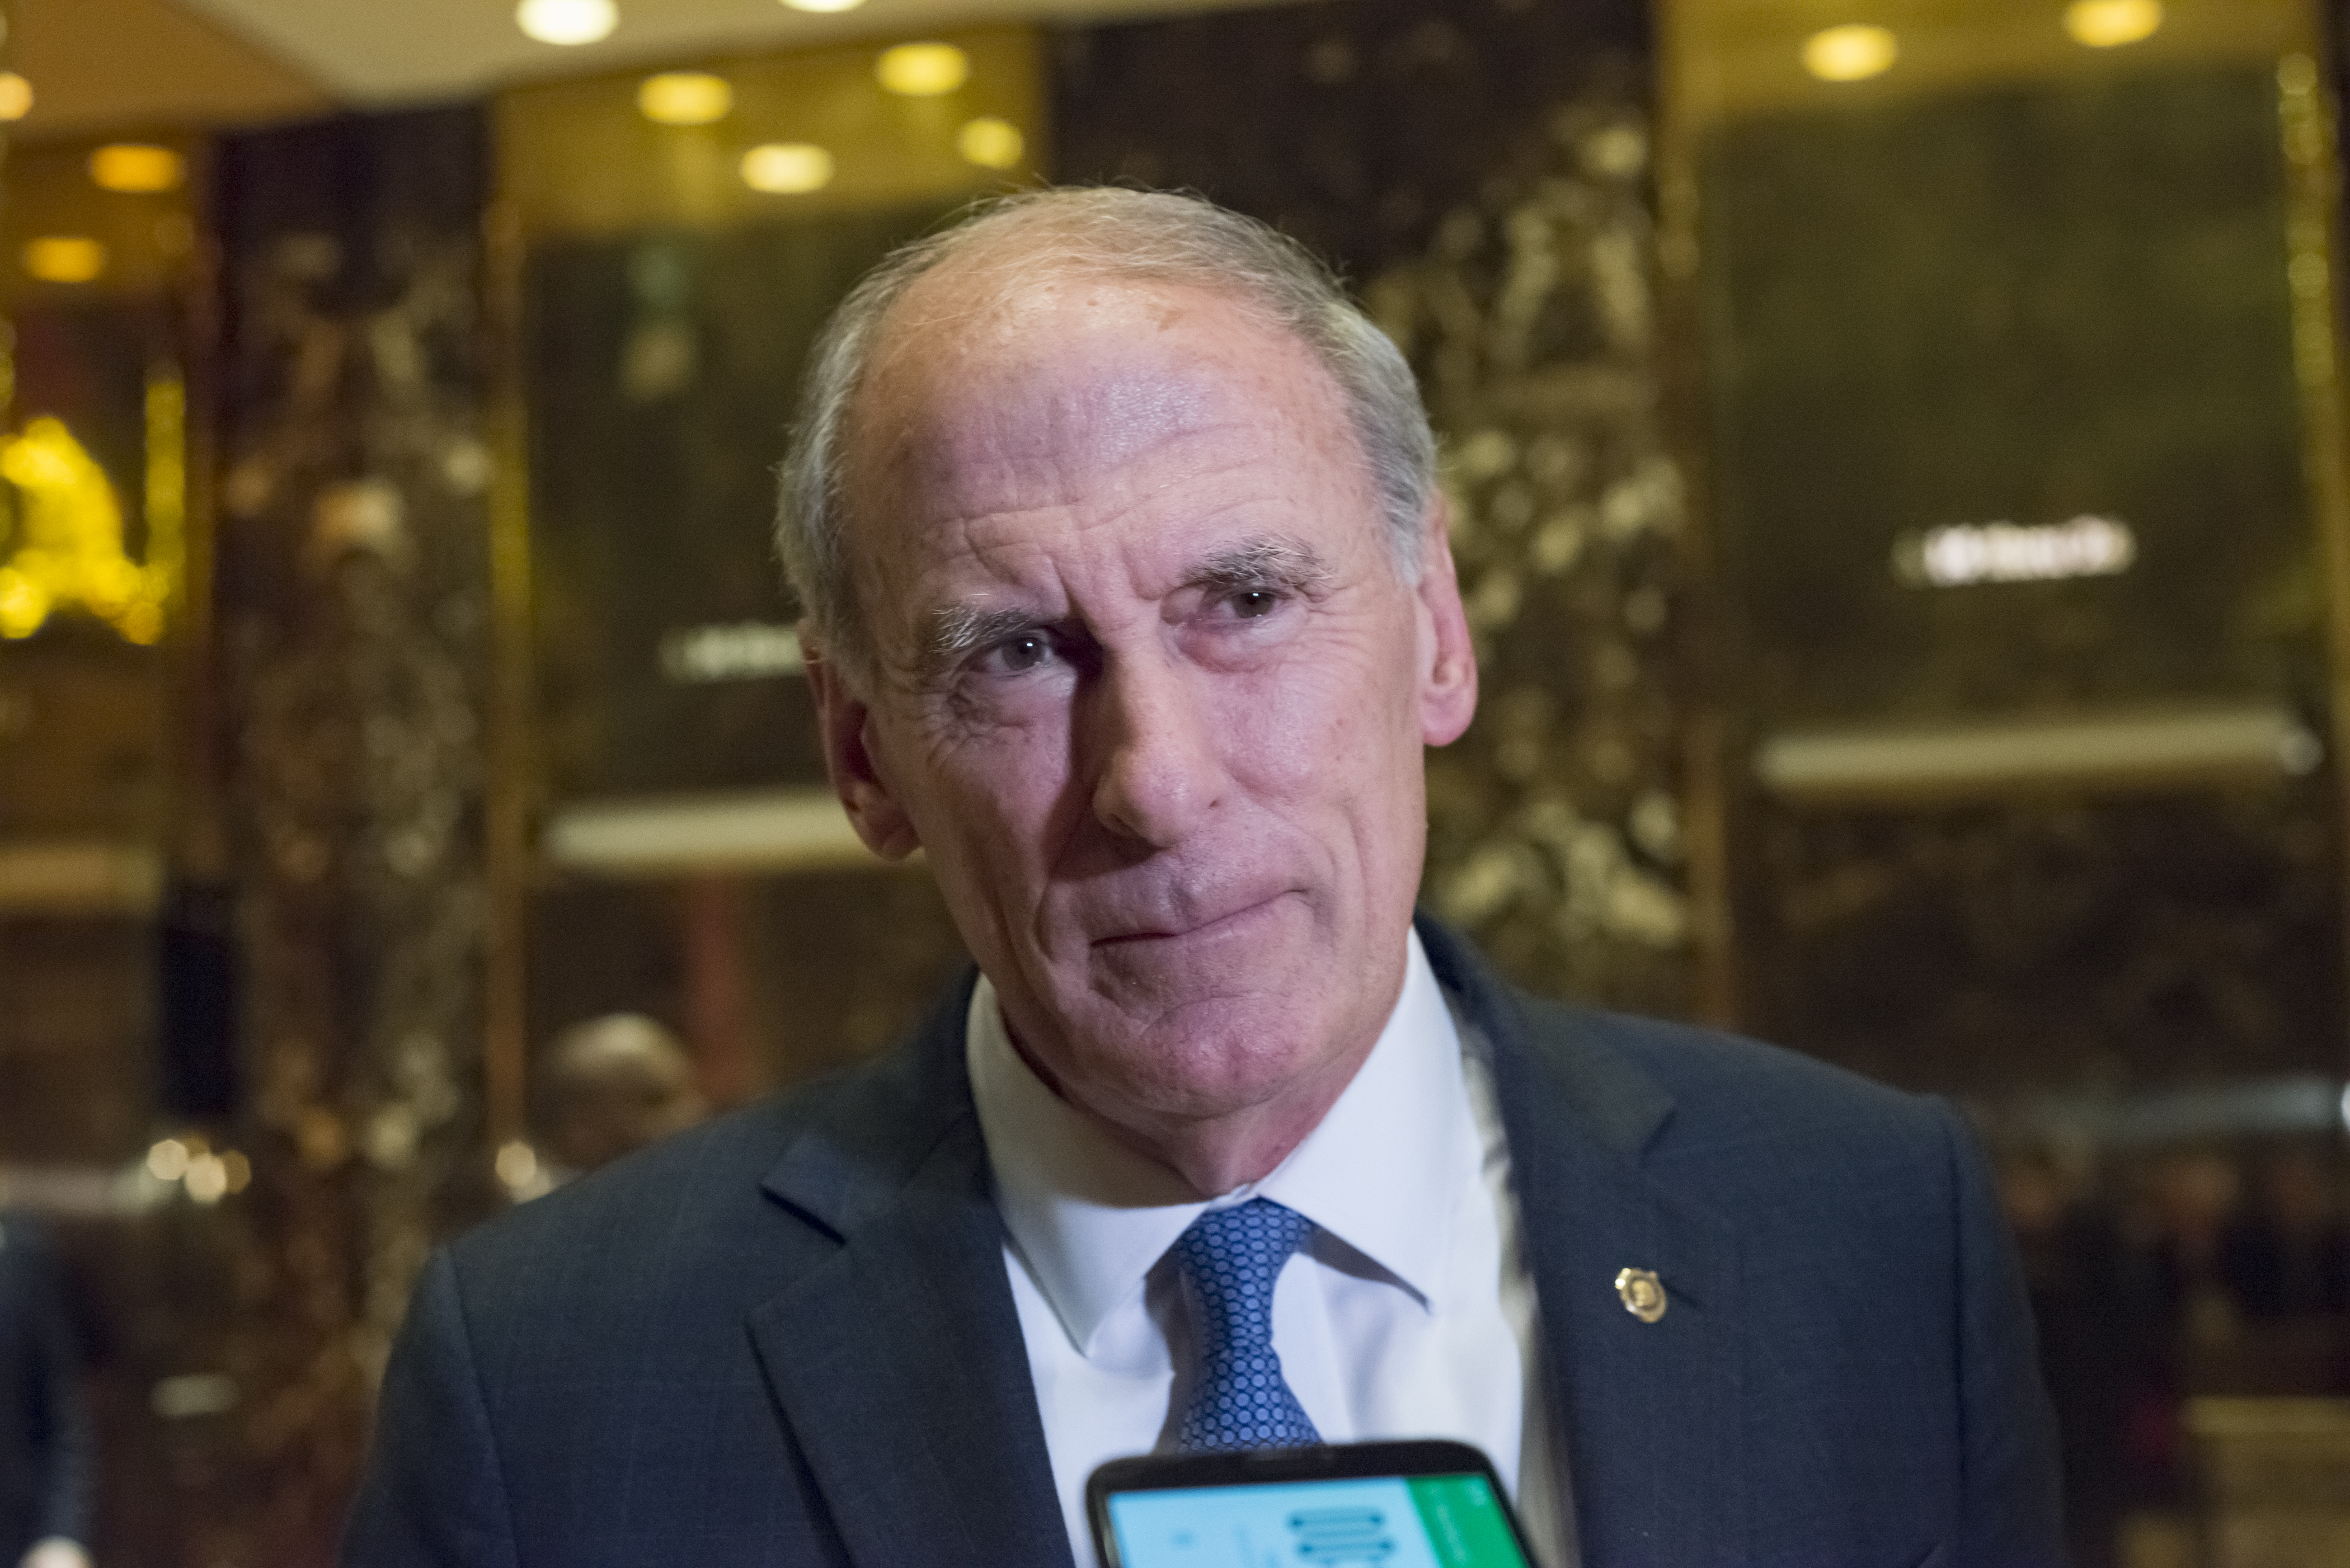 Senator Daniel Coats, a Republican from Indiana, pauses while speaking to the media in the lobby of Trump Tower in New York, U.S., on Wednesday, Nov. 30, 2016. (Albin Lohr-Jones—Bloomberg /Getty Images)